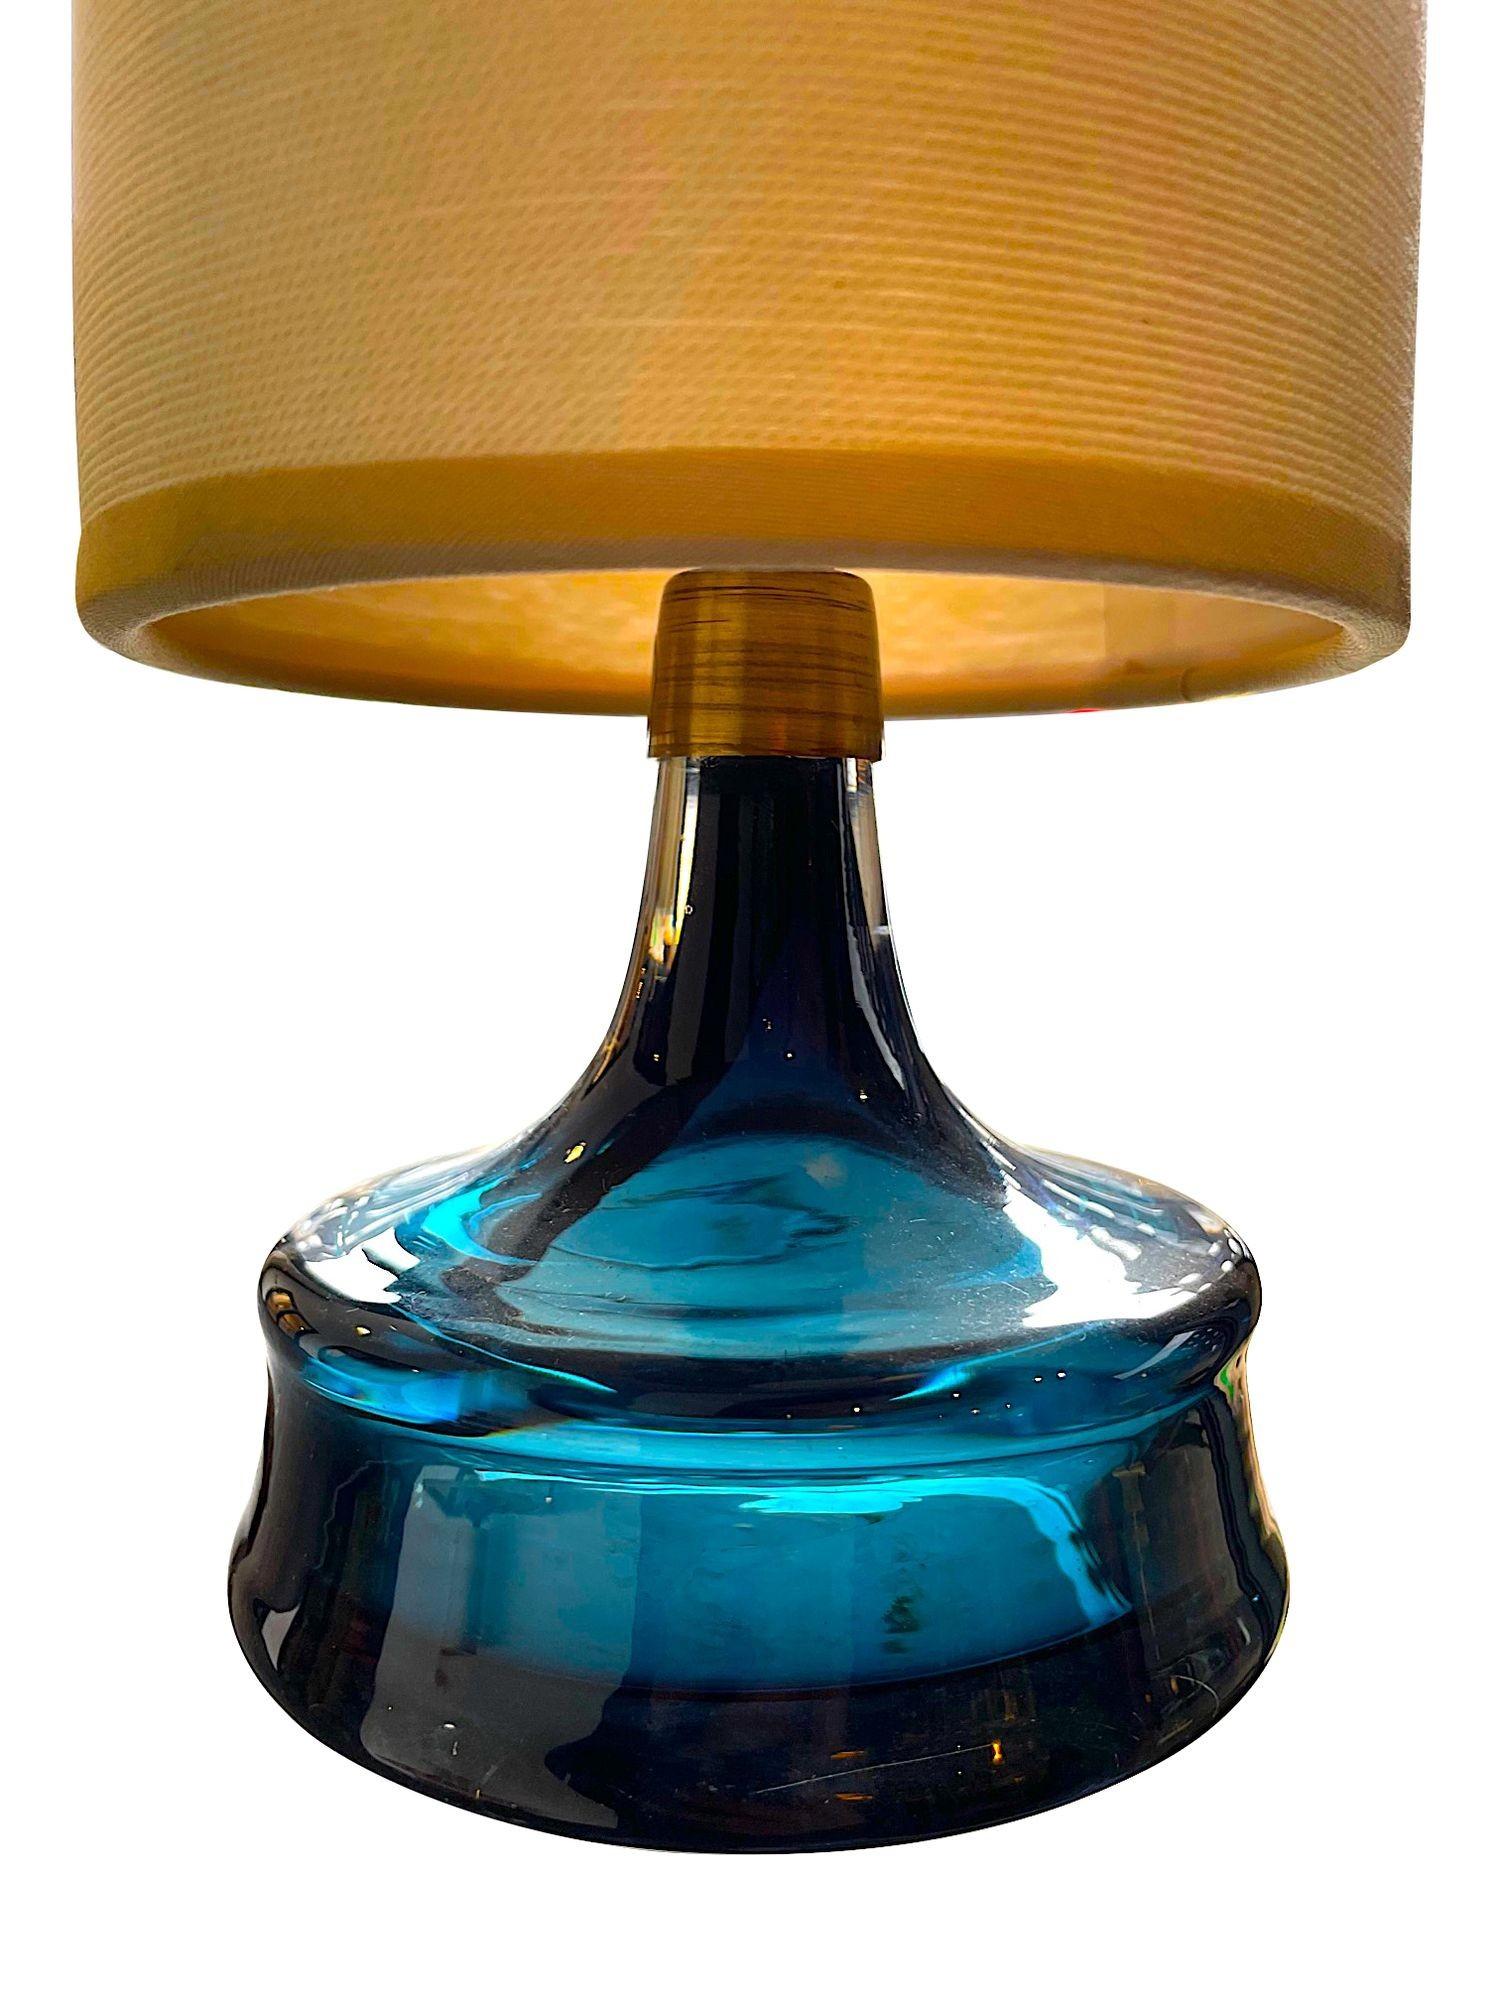 A pair of 1960s Swedish Orrefors blue glass lamps with brass collar and original shades.